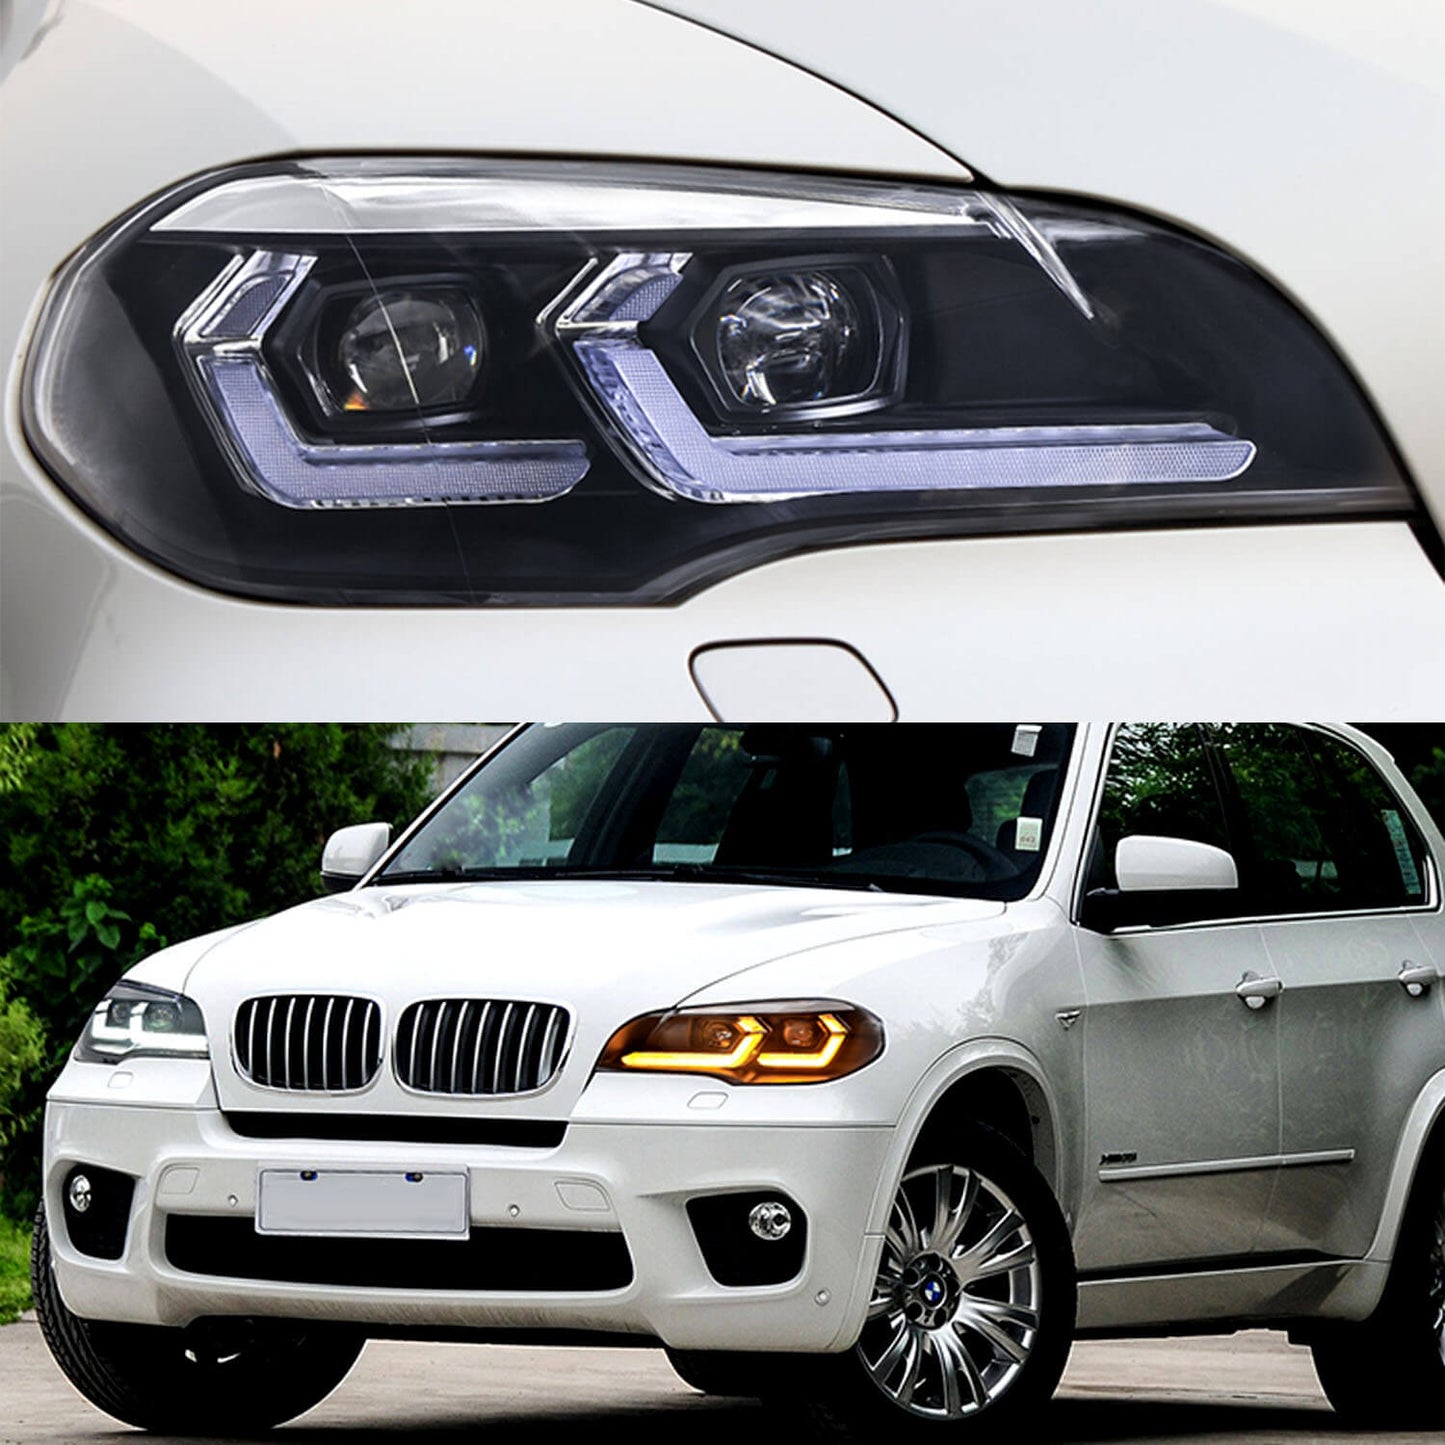 HCMOTION 2007-2013 LED Headlights For BMW X5 E70